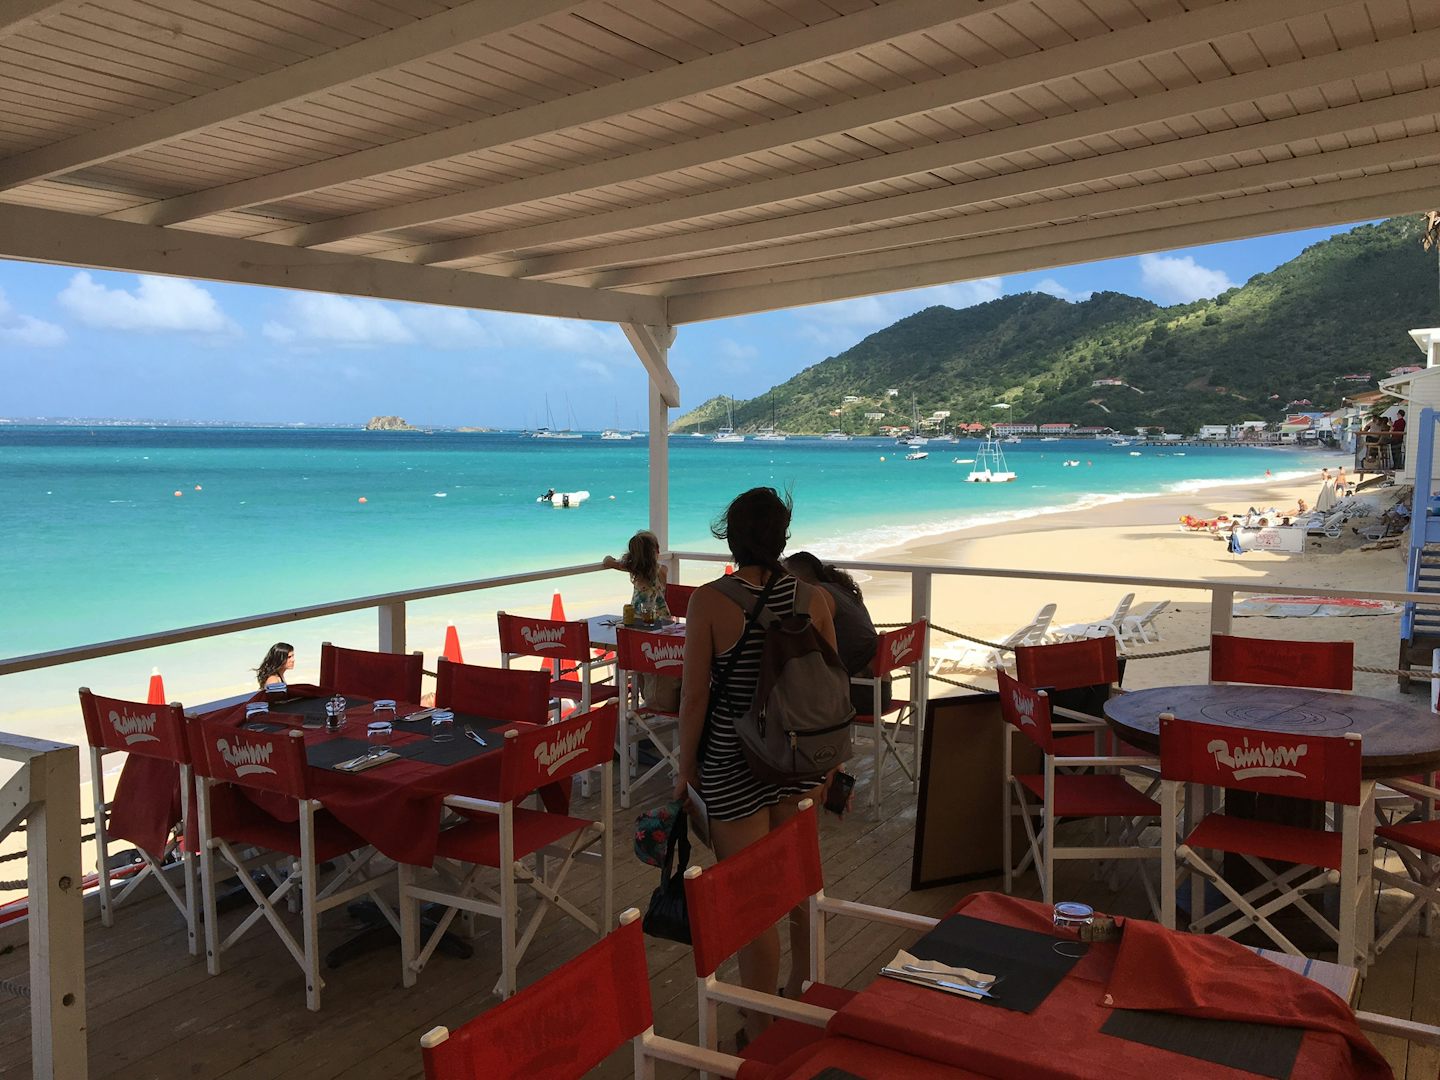 Rainbow Restaurant in Grand Case. Gorgeous beach. If you eat lunch there, t